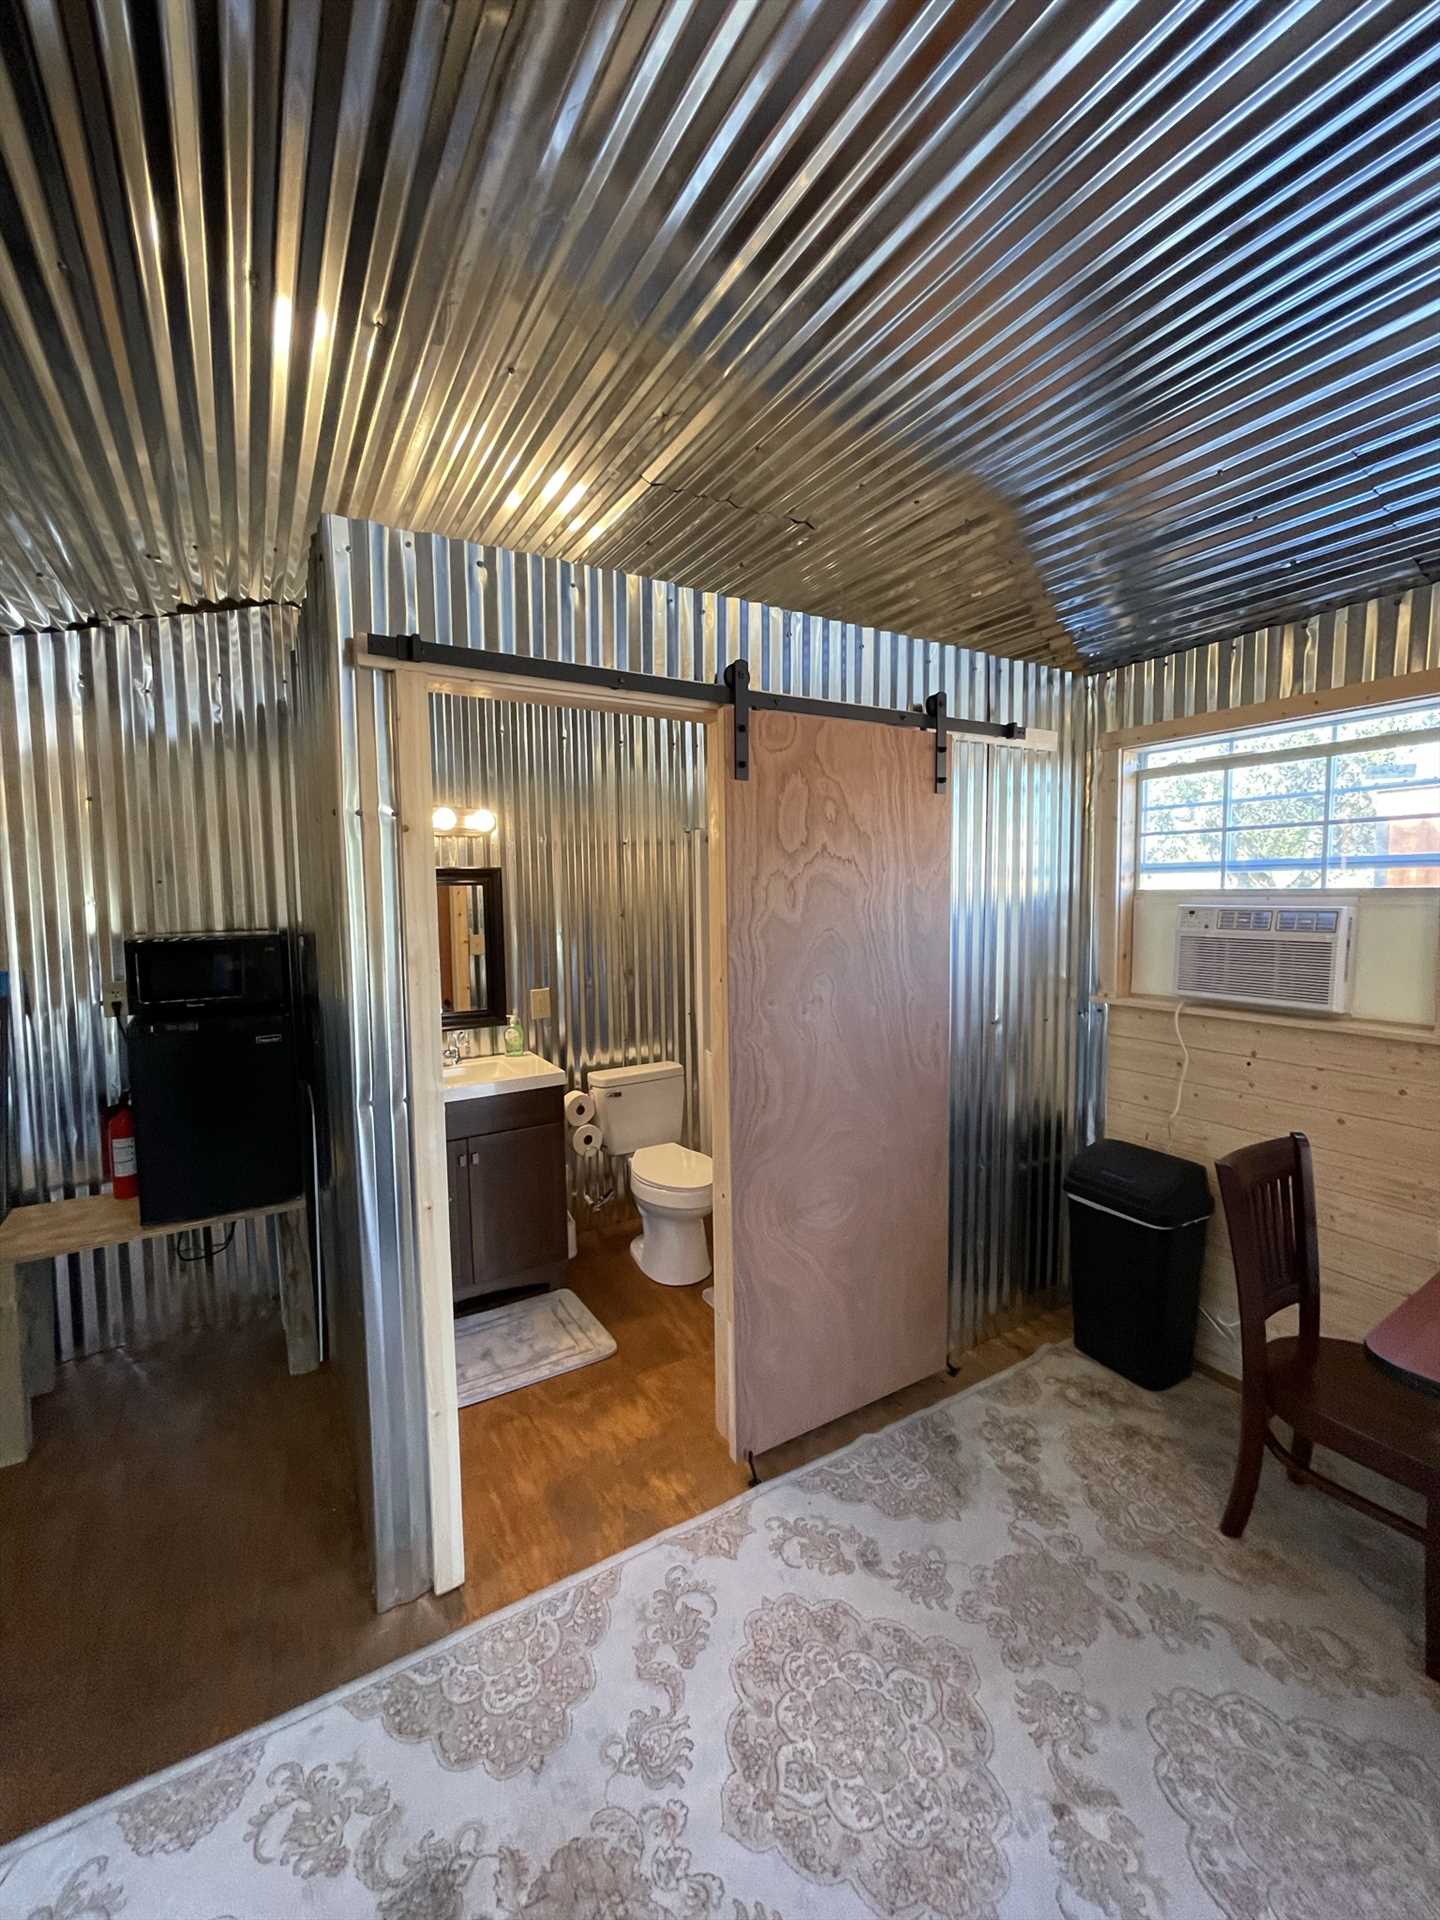                                                 The cabin's kitchenette includes a mini fridge, microwave, and complimentary K-Cup coffee!